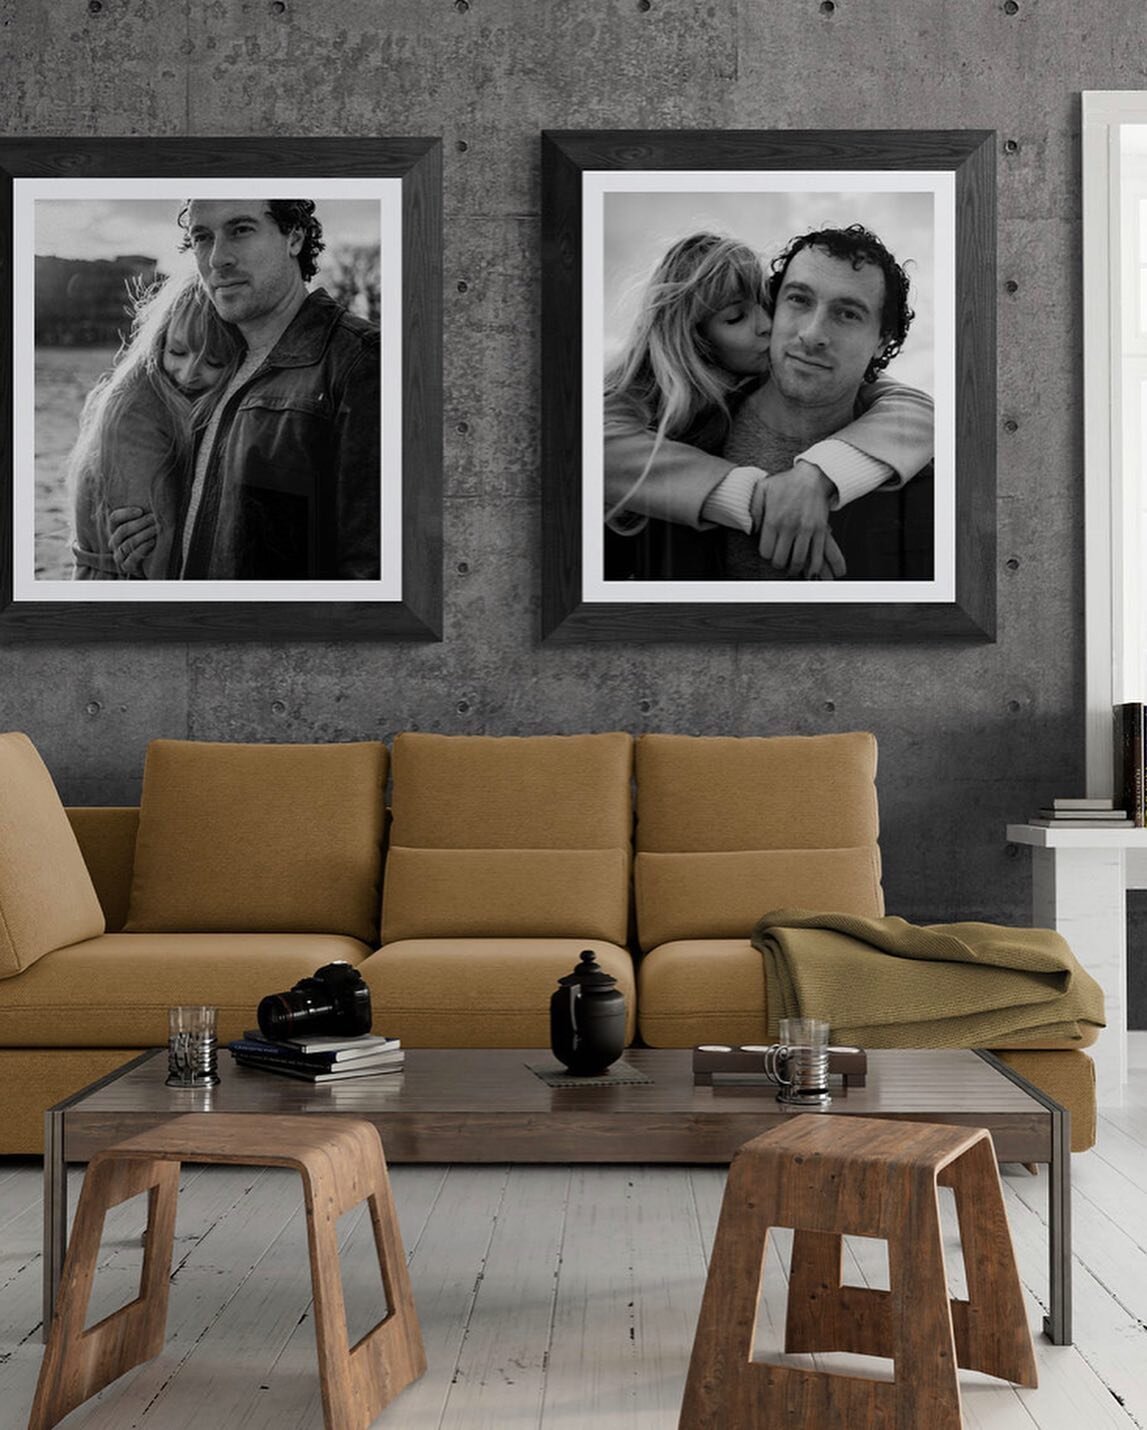 Nowadays we have hundreds of photos on our phones and other electronic devices, but does it make the same impact as permanently displayed printed photos?&hellip;Well, not  really &hellip;Psychological studies show that displaying photos in your home 